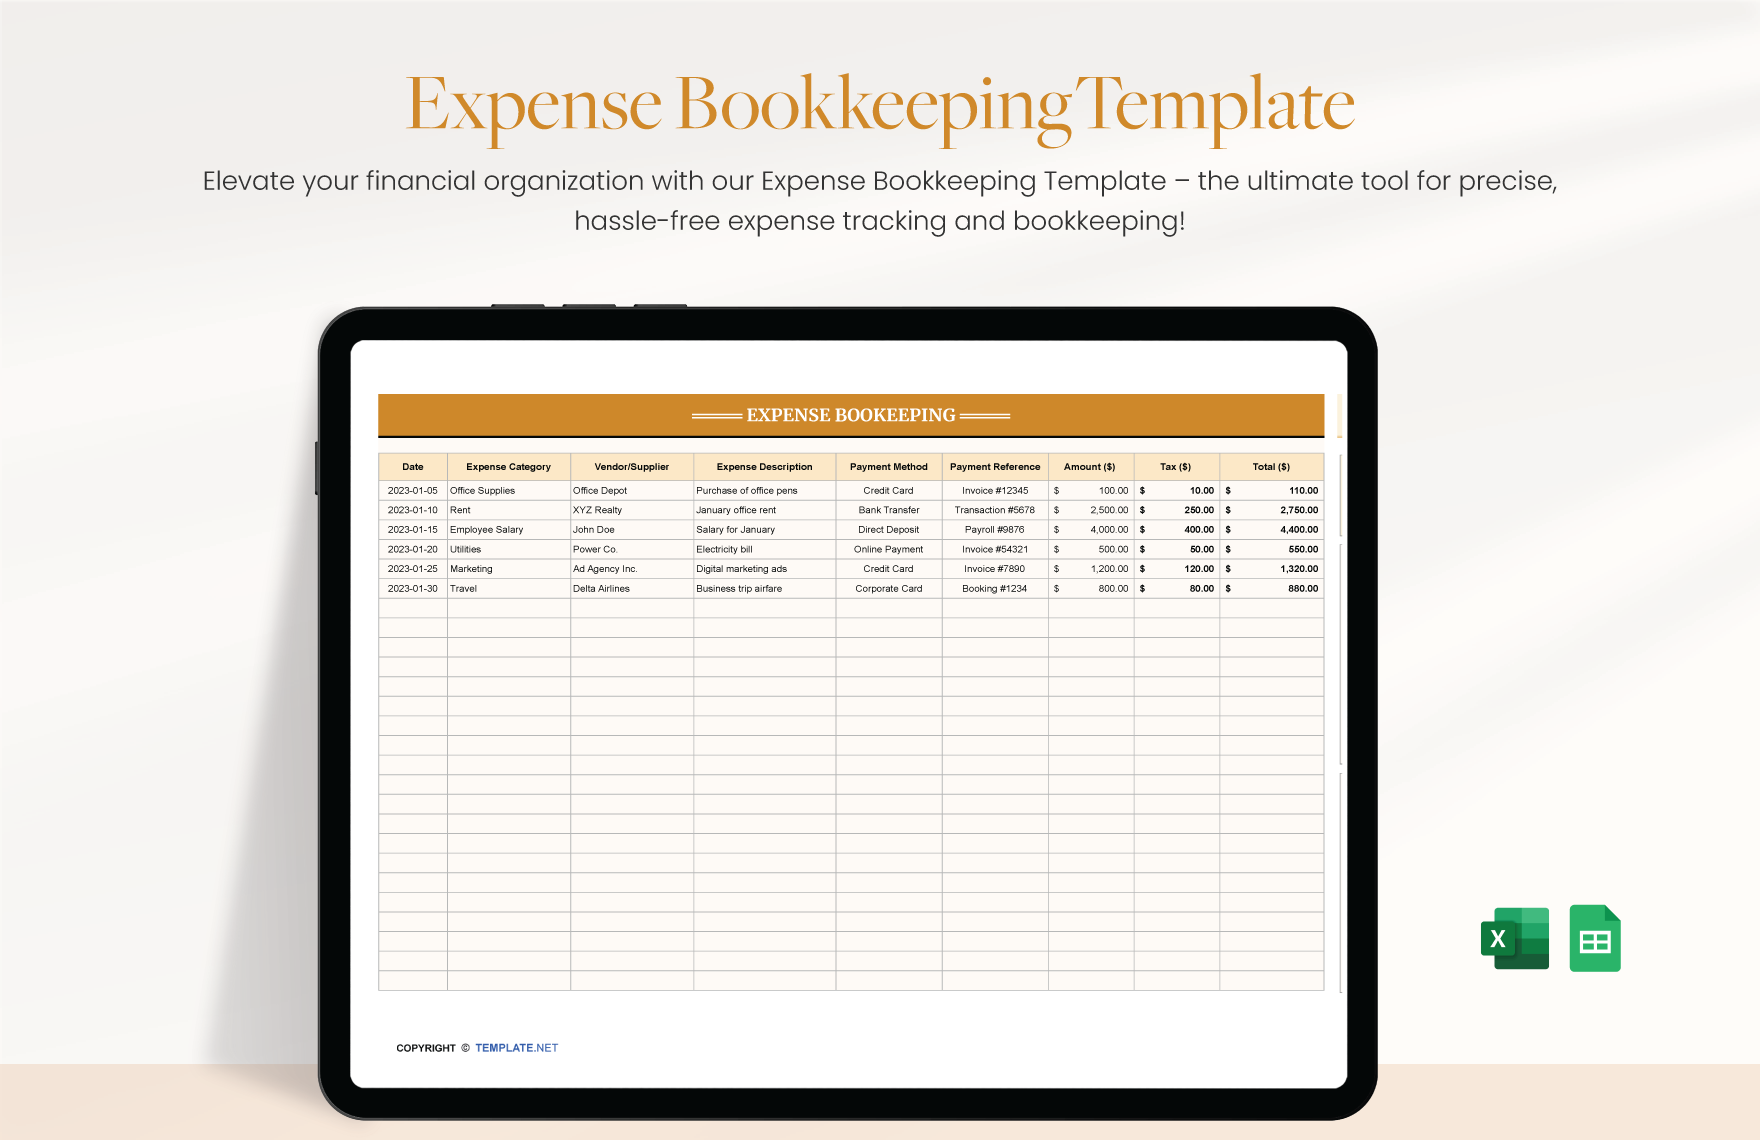 Expense Bookkeeping Template in Excel, Google Sheets